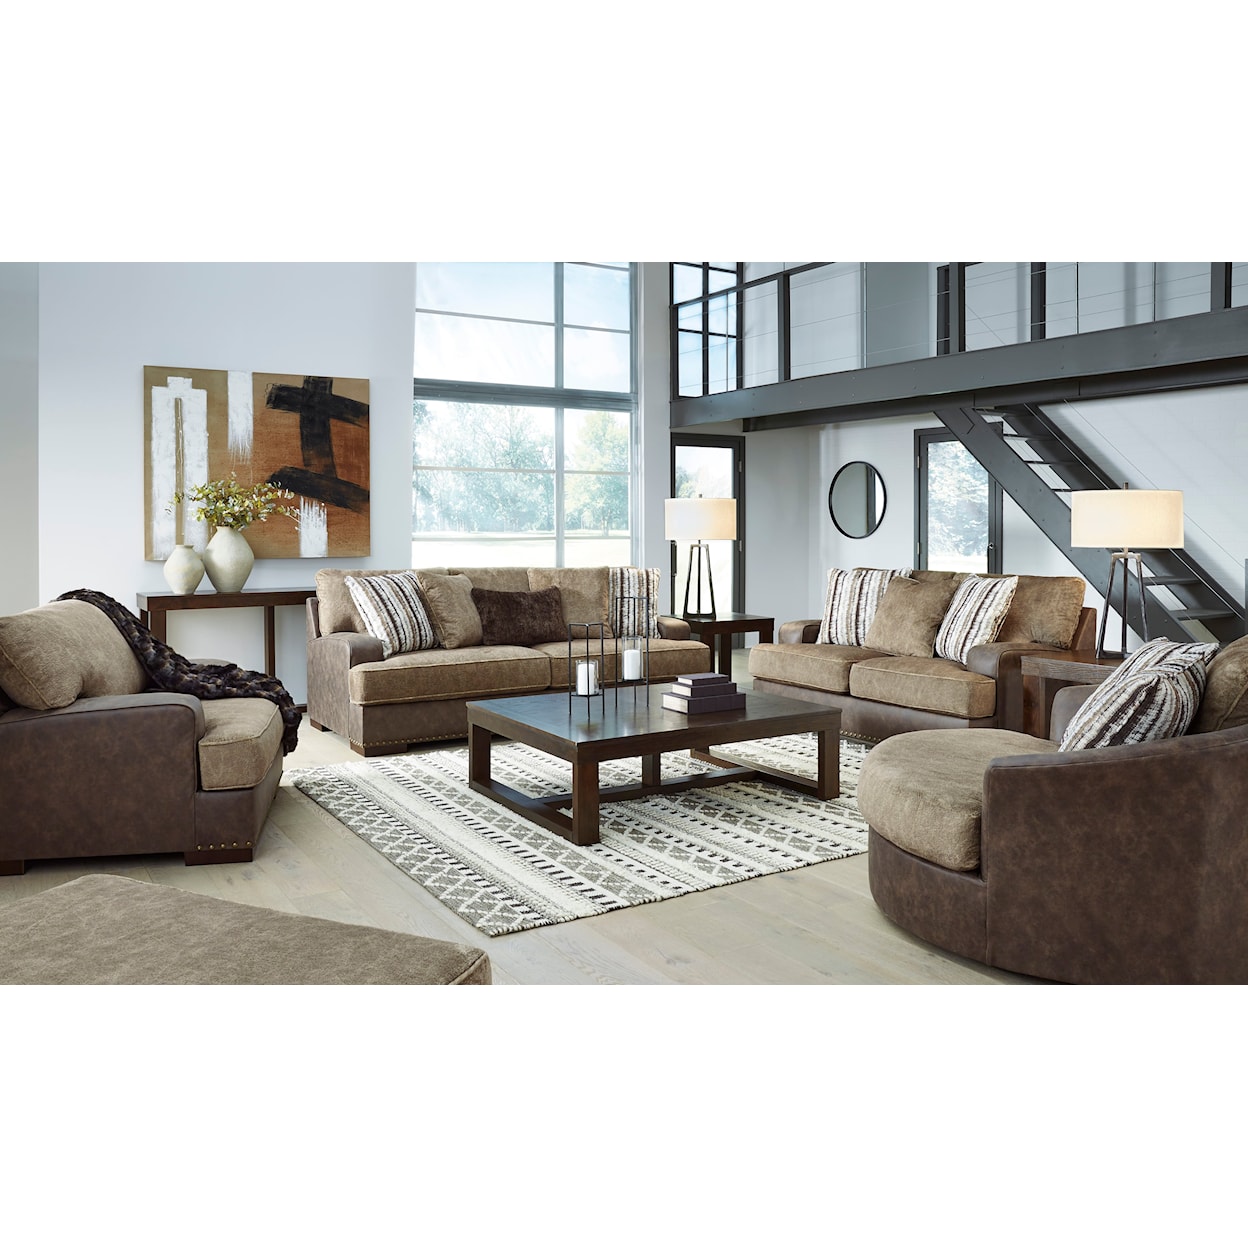 Signature Design by Ashley Alesbury Living Room Set